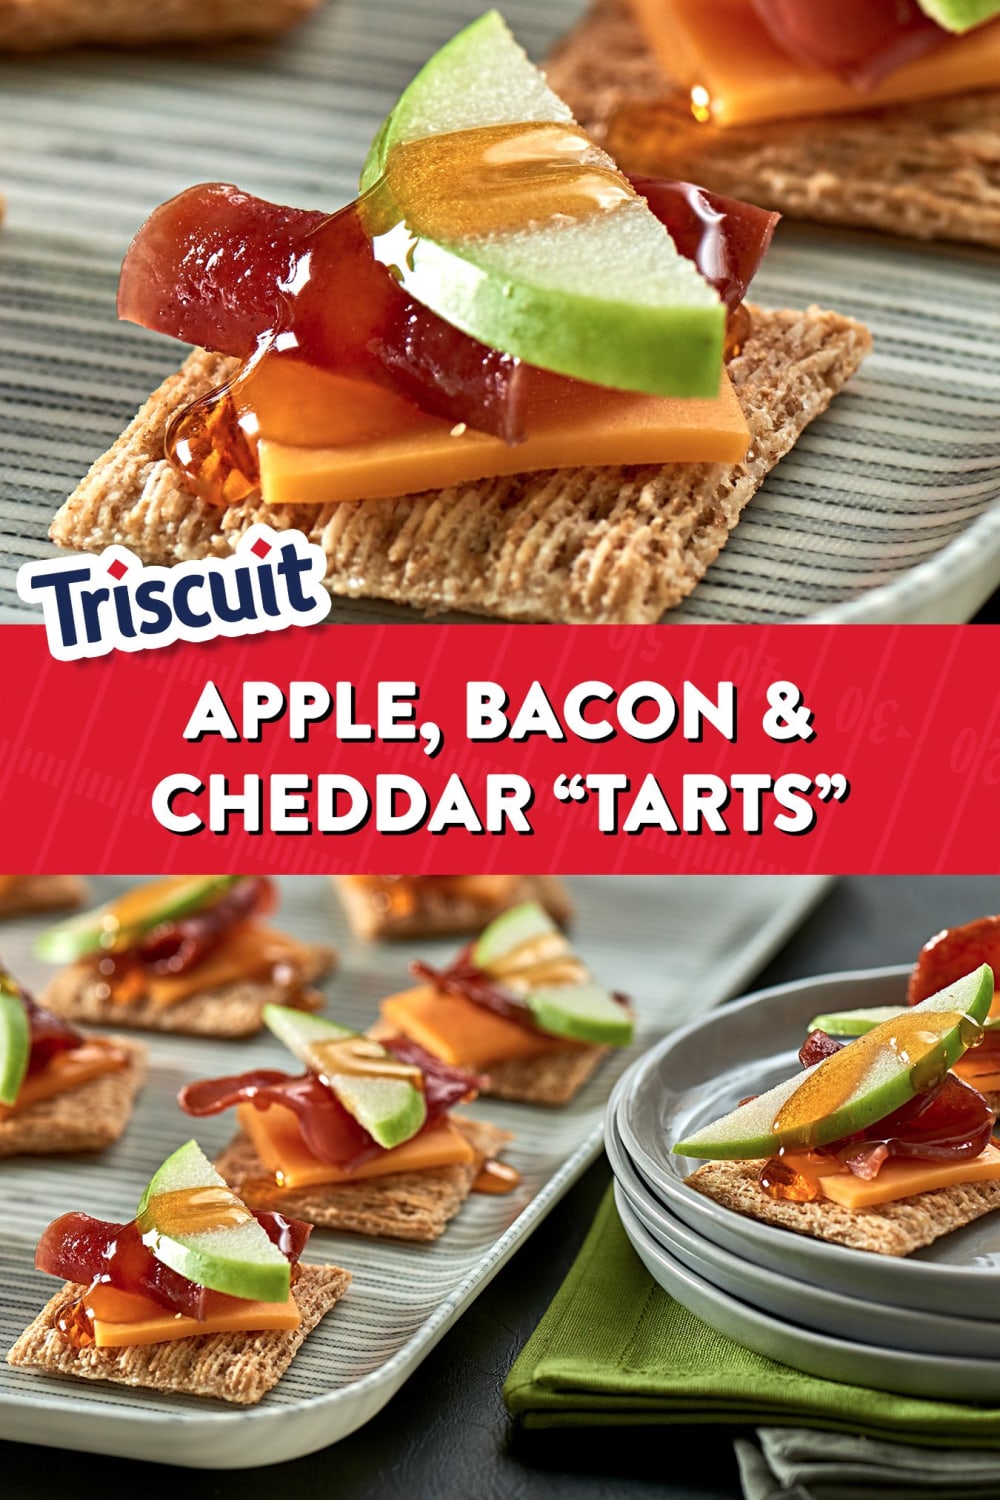 TRISCUIT APPLE, BACON & CHEDDAR “TARTS” | Triscuit recipes, Recipes appetizers and snacks, Recipes